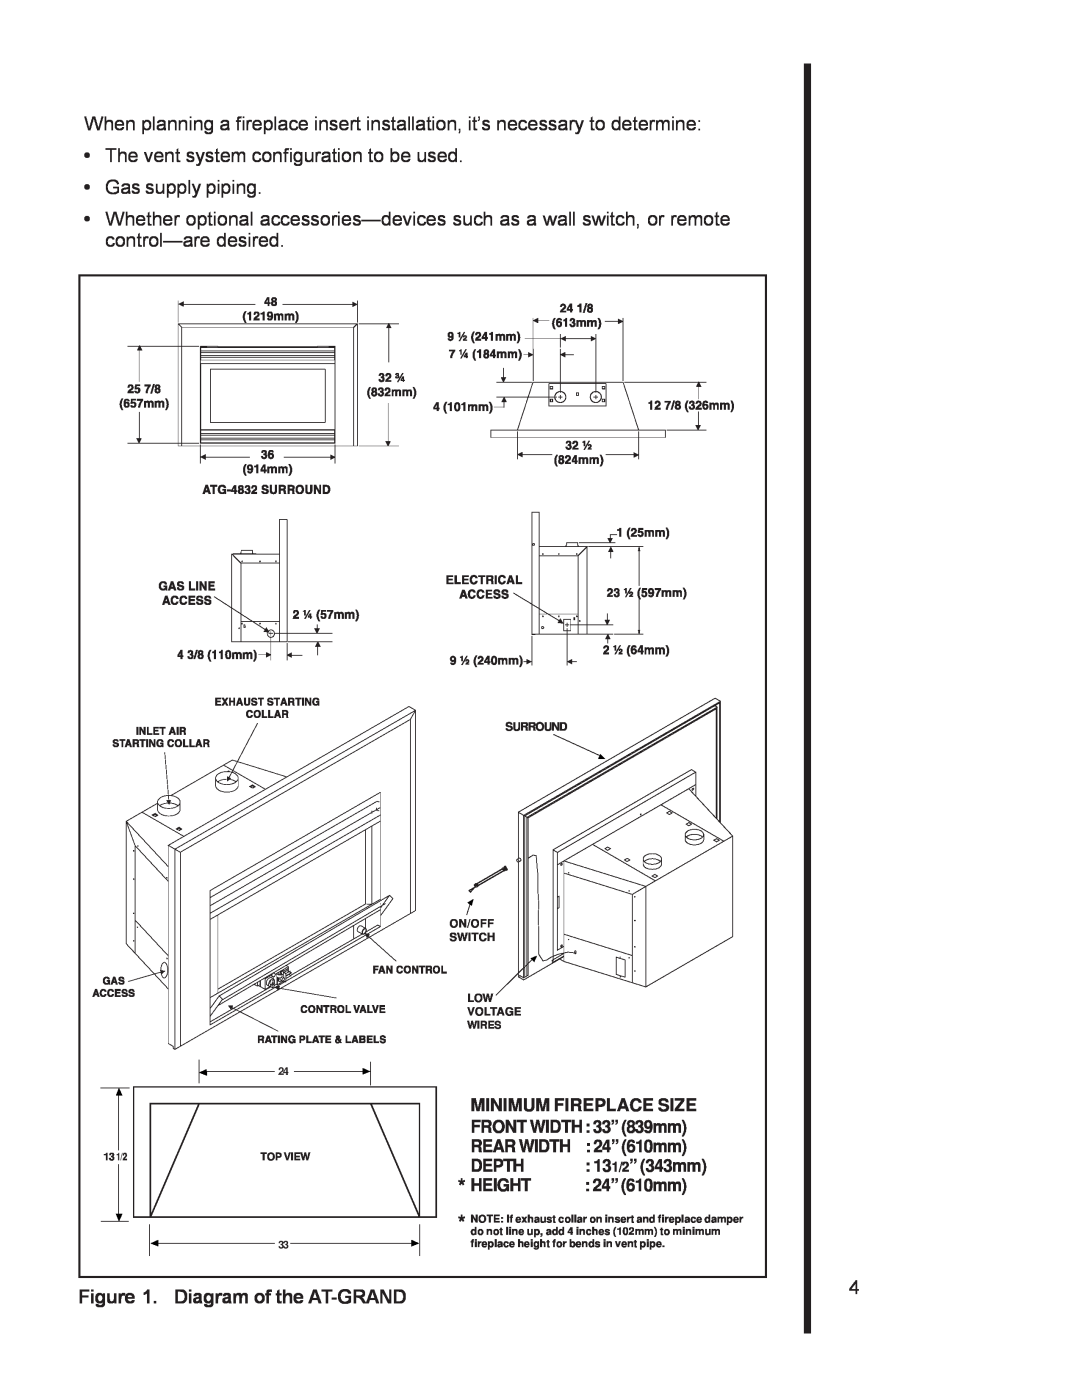 Heat & Glo LifeStyle manual Diagram of the AT-GRAND, Depth, 131/2” 343mm, Height, 24” 610mm, Gas supply piping, 13 1/2 